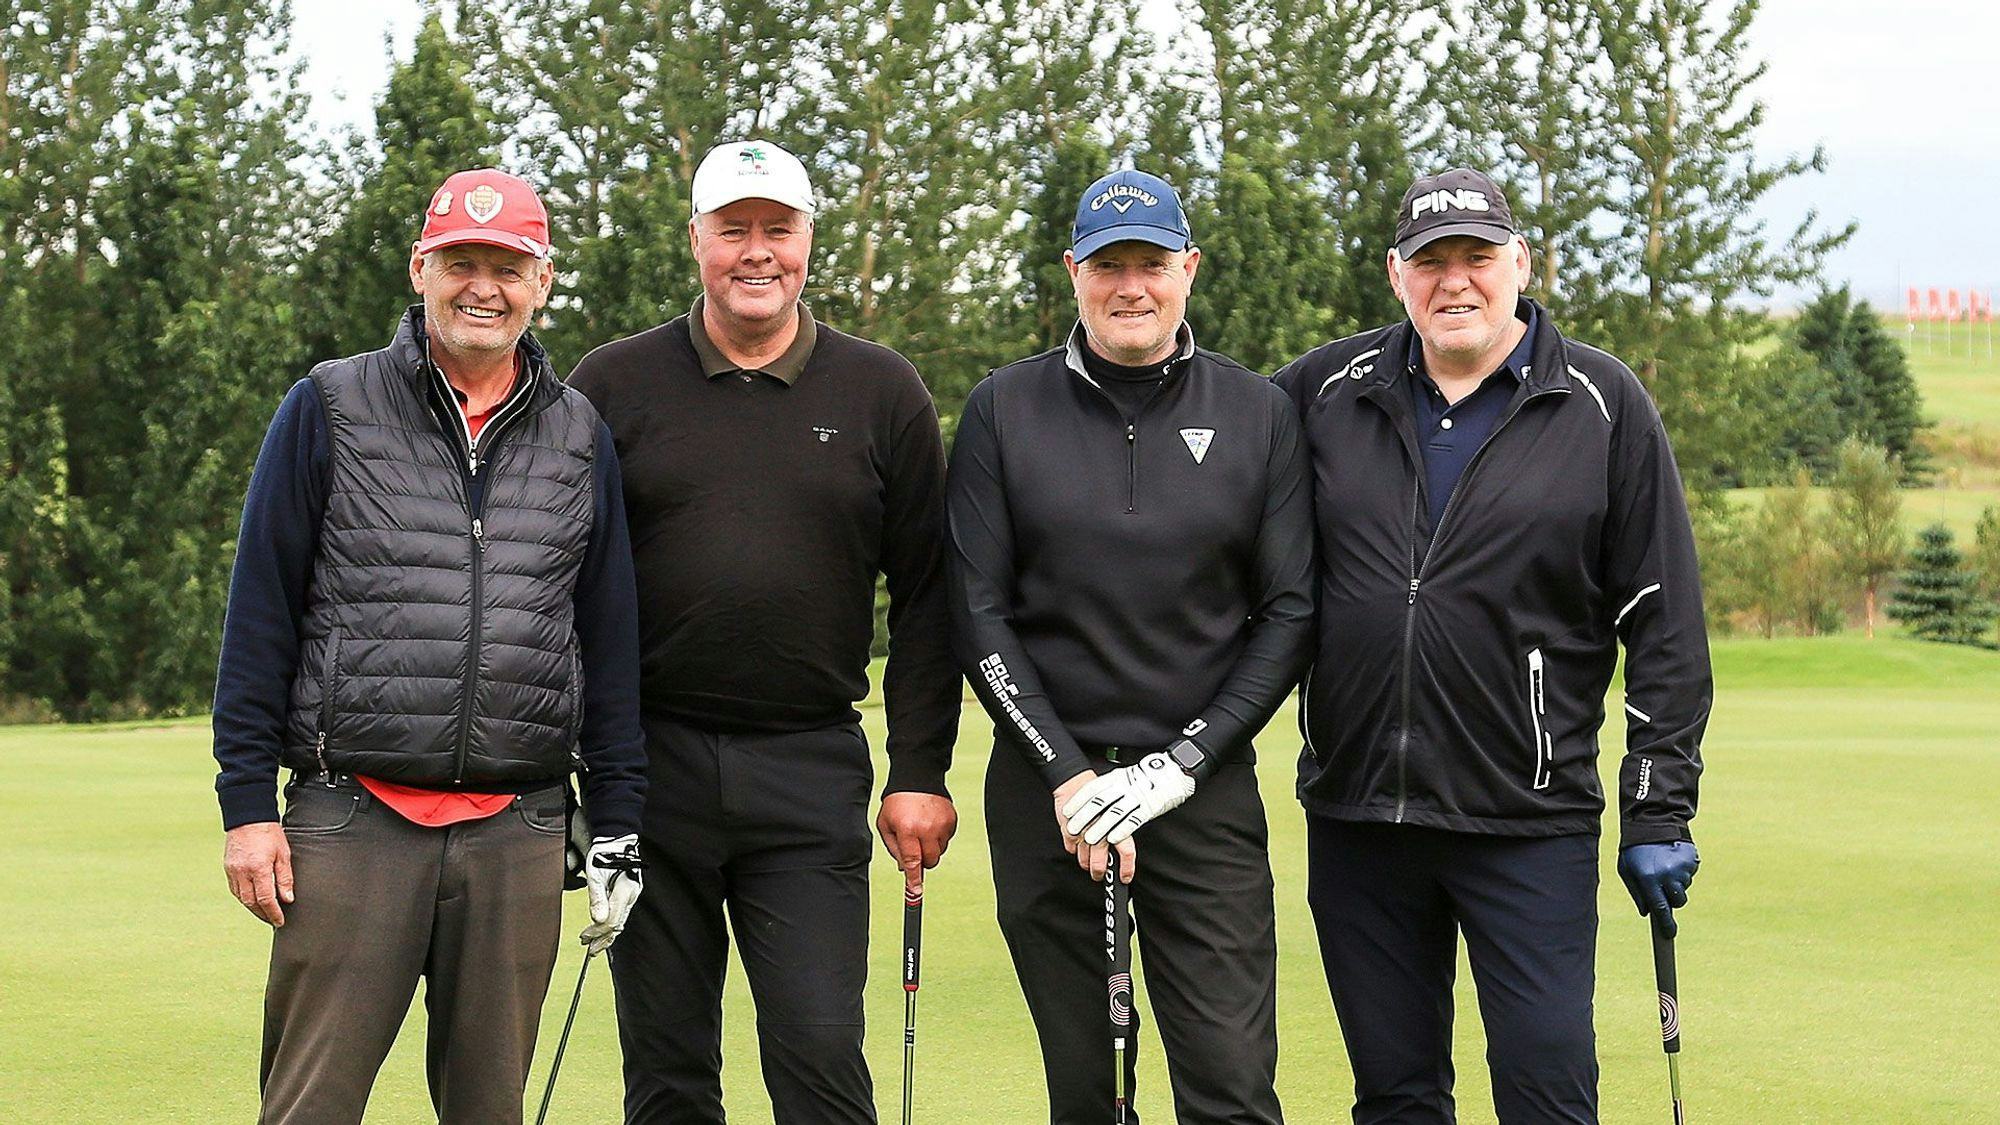 Four men wearing golf attire and caps, standing close together on a golf course